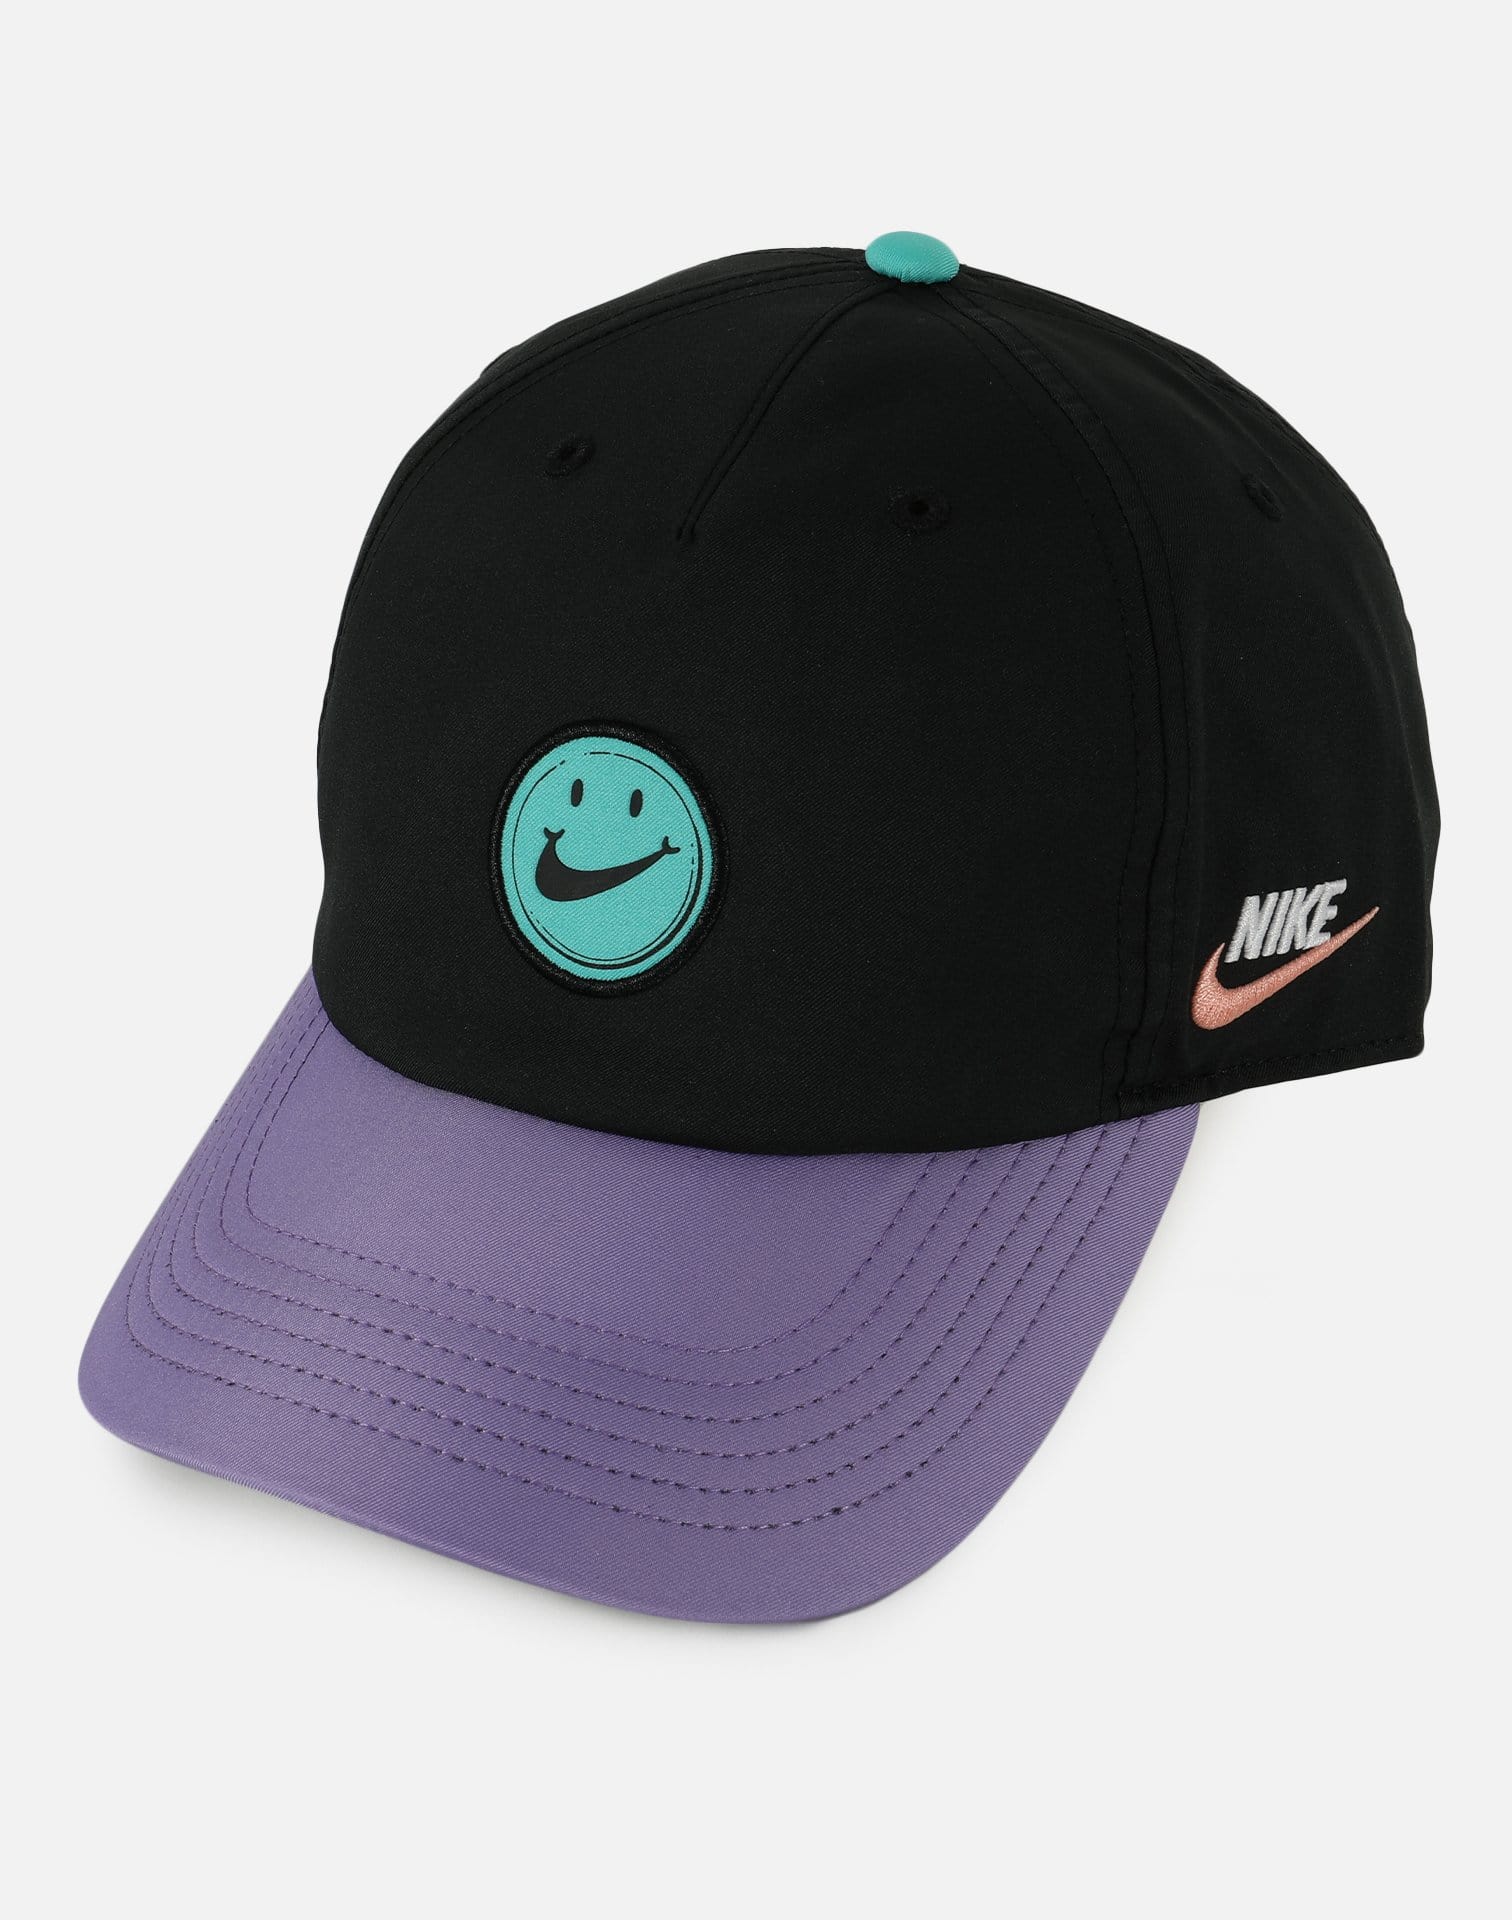 NSW 'HAVE A NIKE DAY' CAP – DTLR